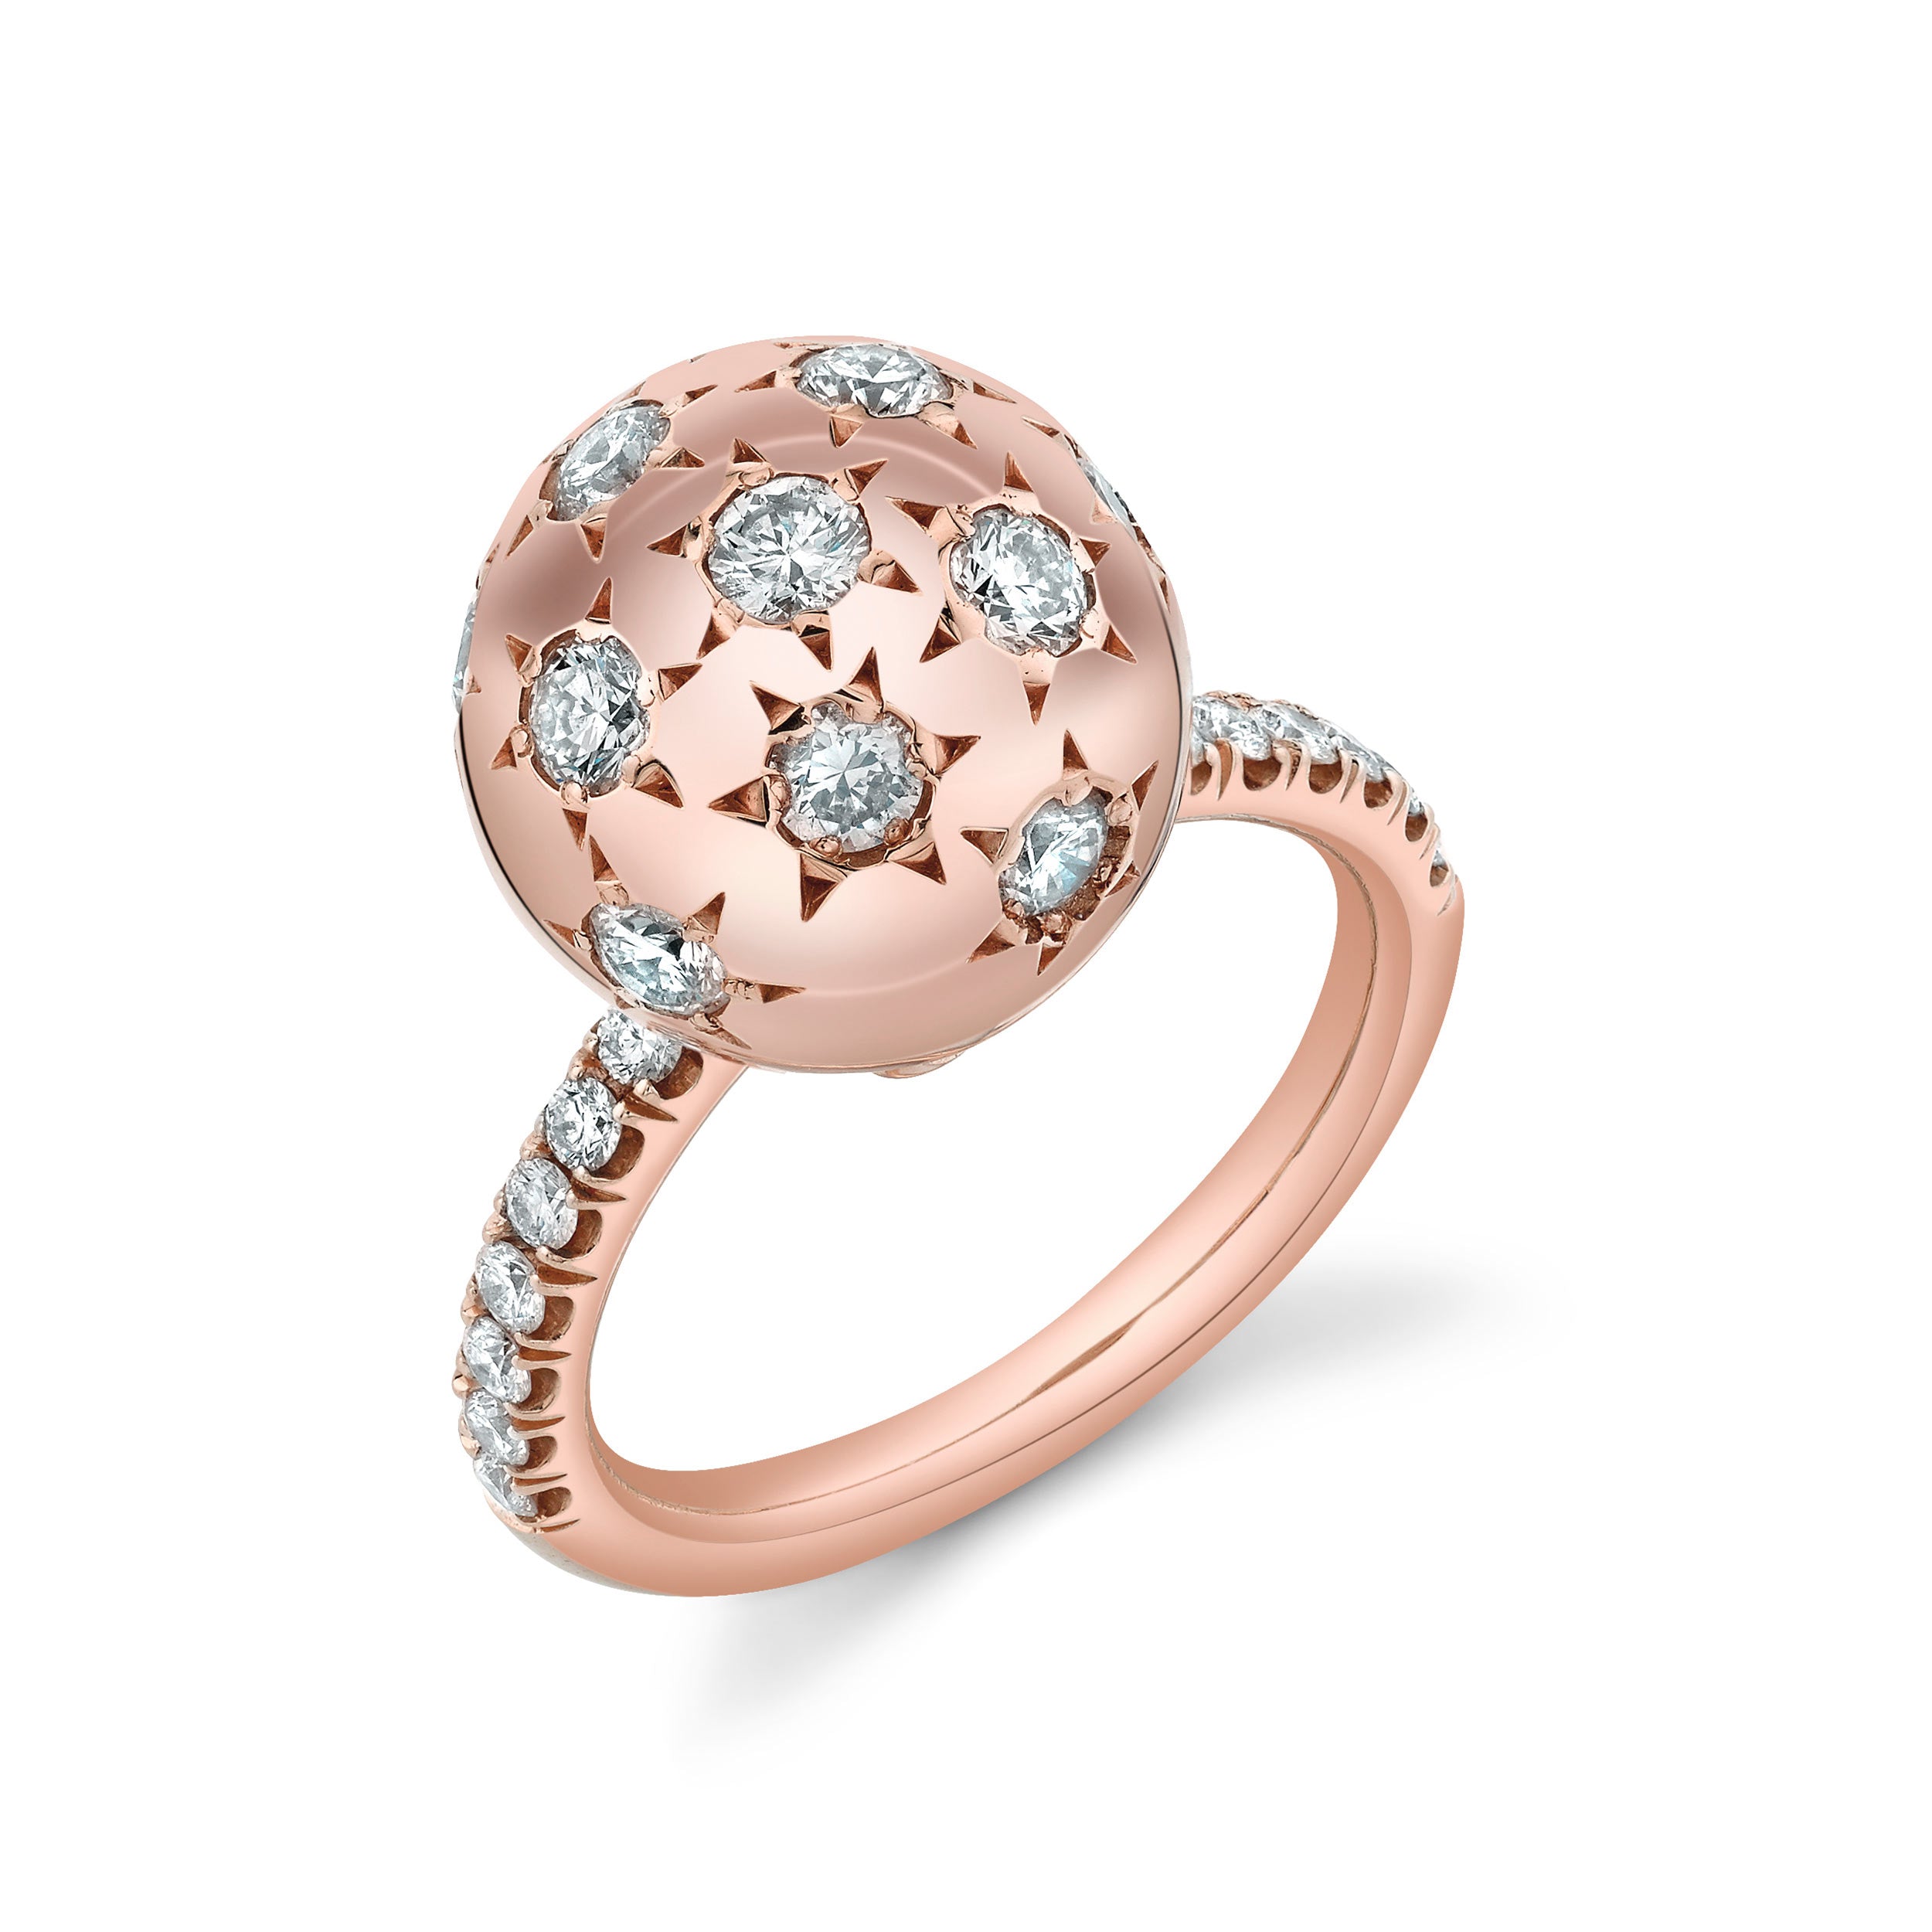 Rose Des Vents Ring Pink Gold, Diamonds and Pink Opal